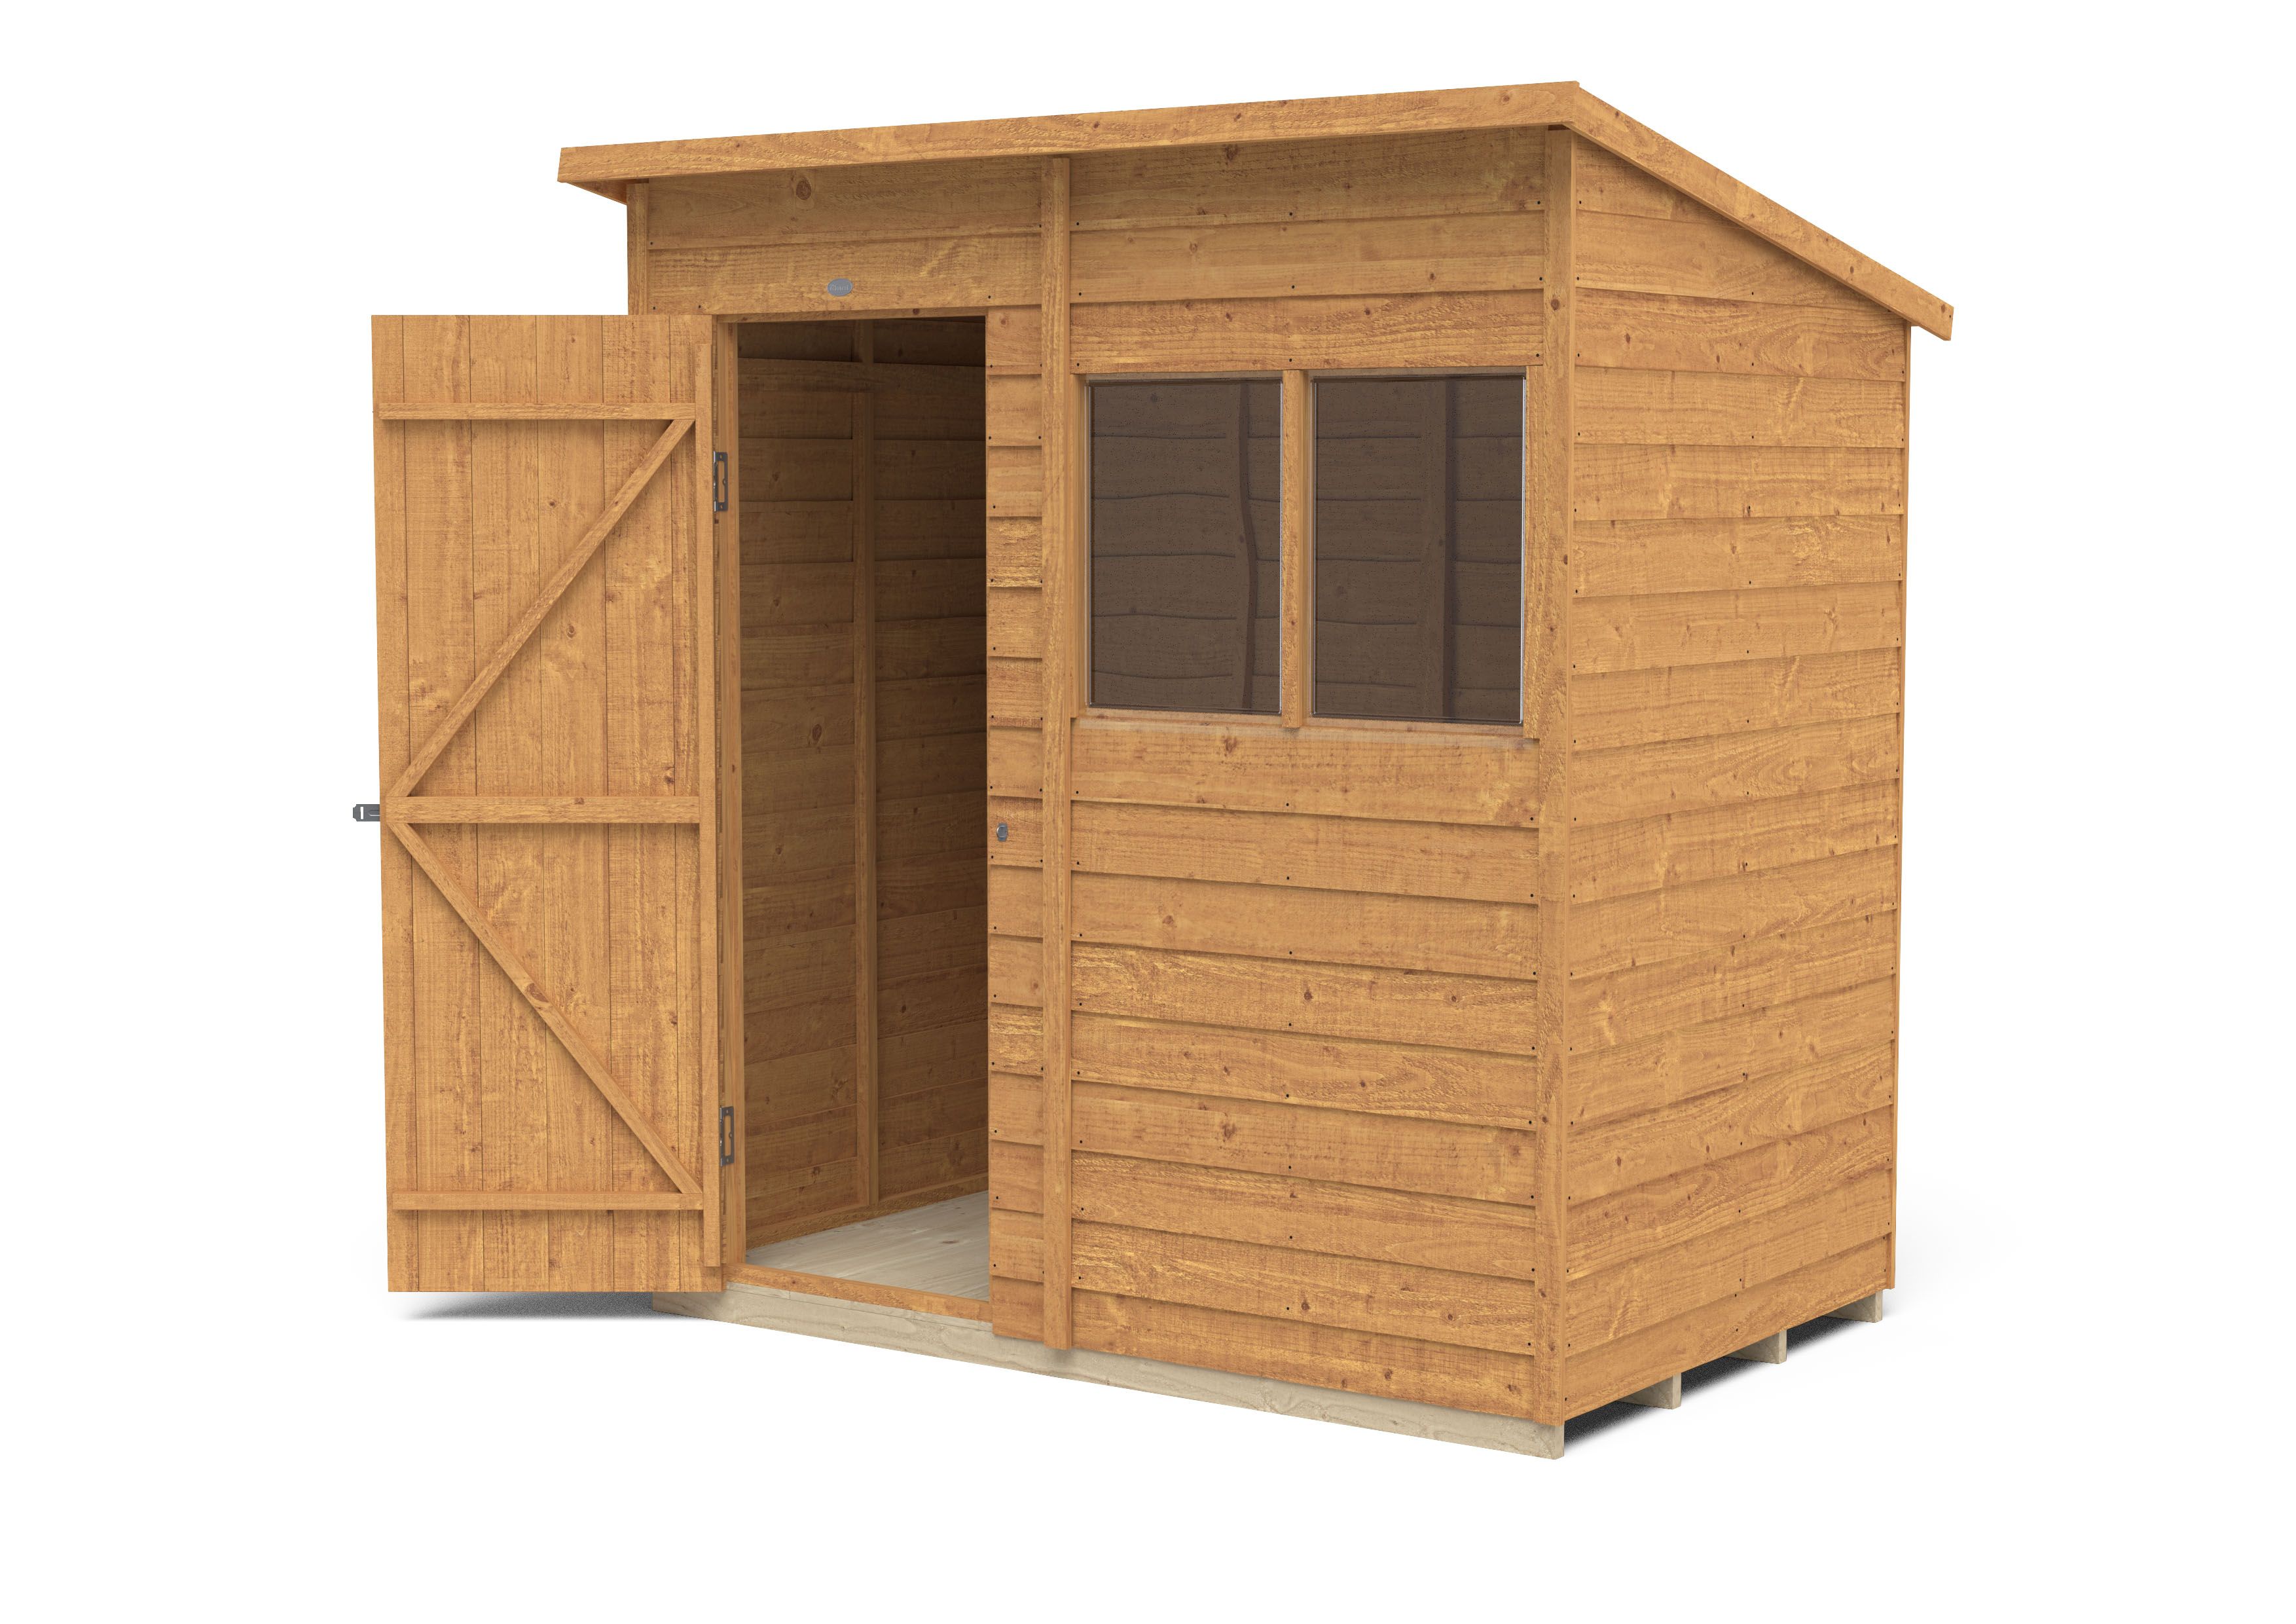 Forest Garden Overlap 6x4 ft Pent Wooden Dip treated Shed with floor & 2 windows (Base included) - Assembly service included